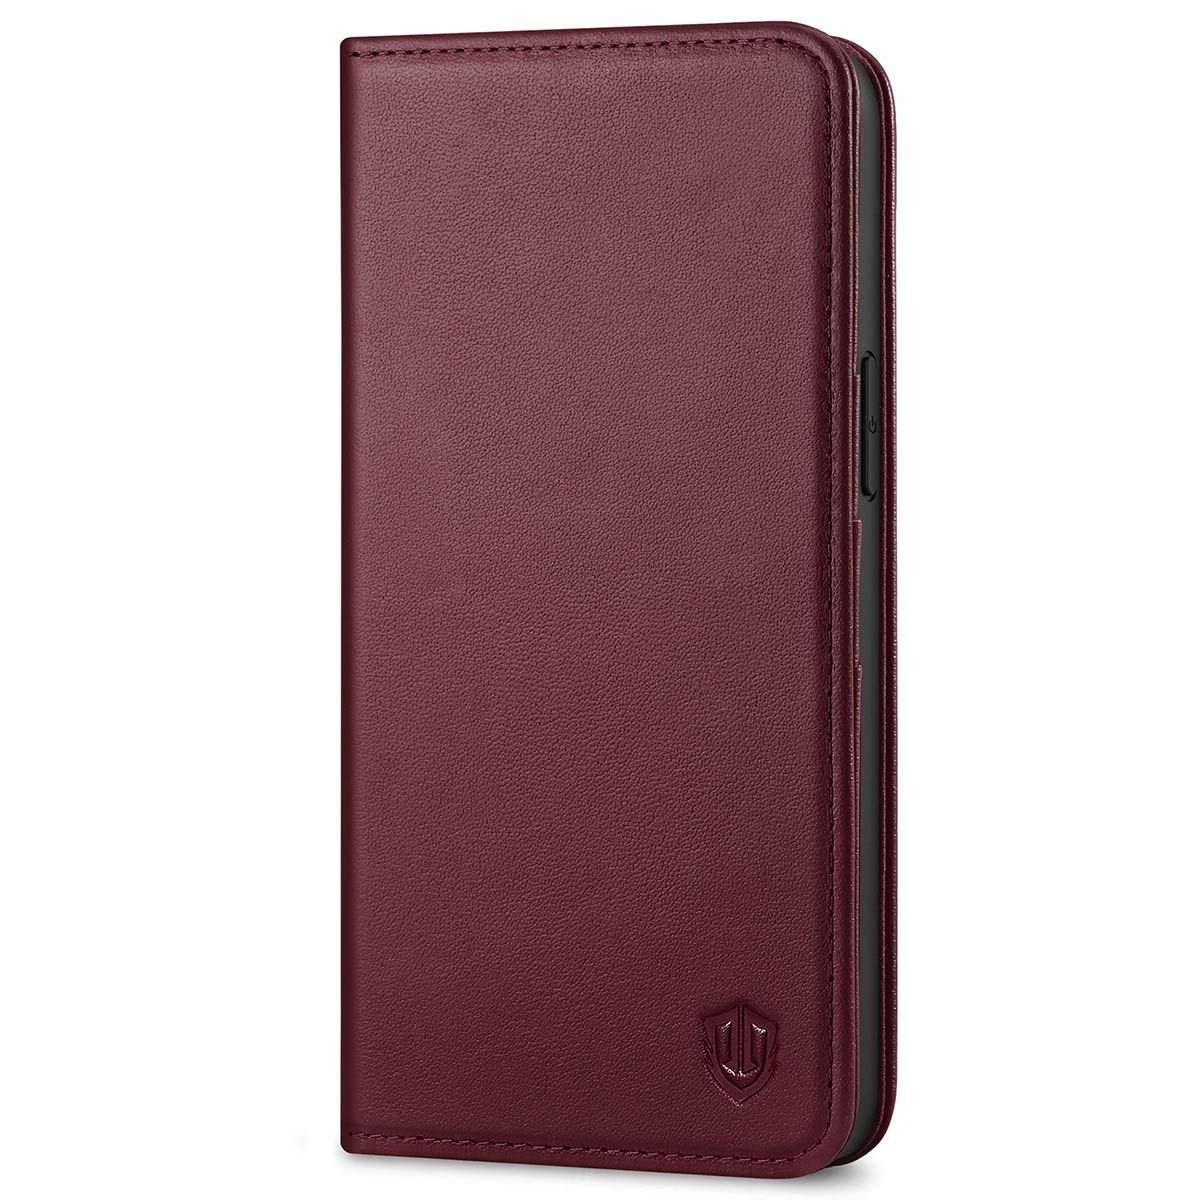 SHIELDON iPhone XR Wallet Case, Magnetic Closure Cover, Genuine Leather